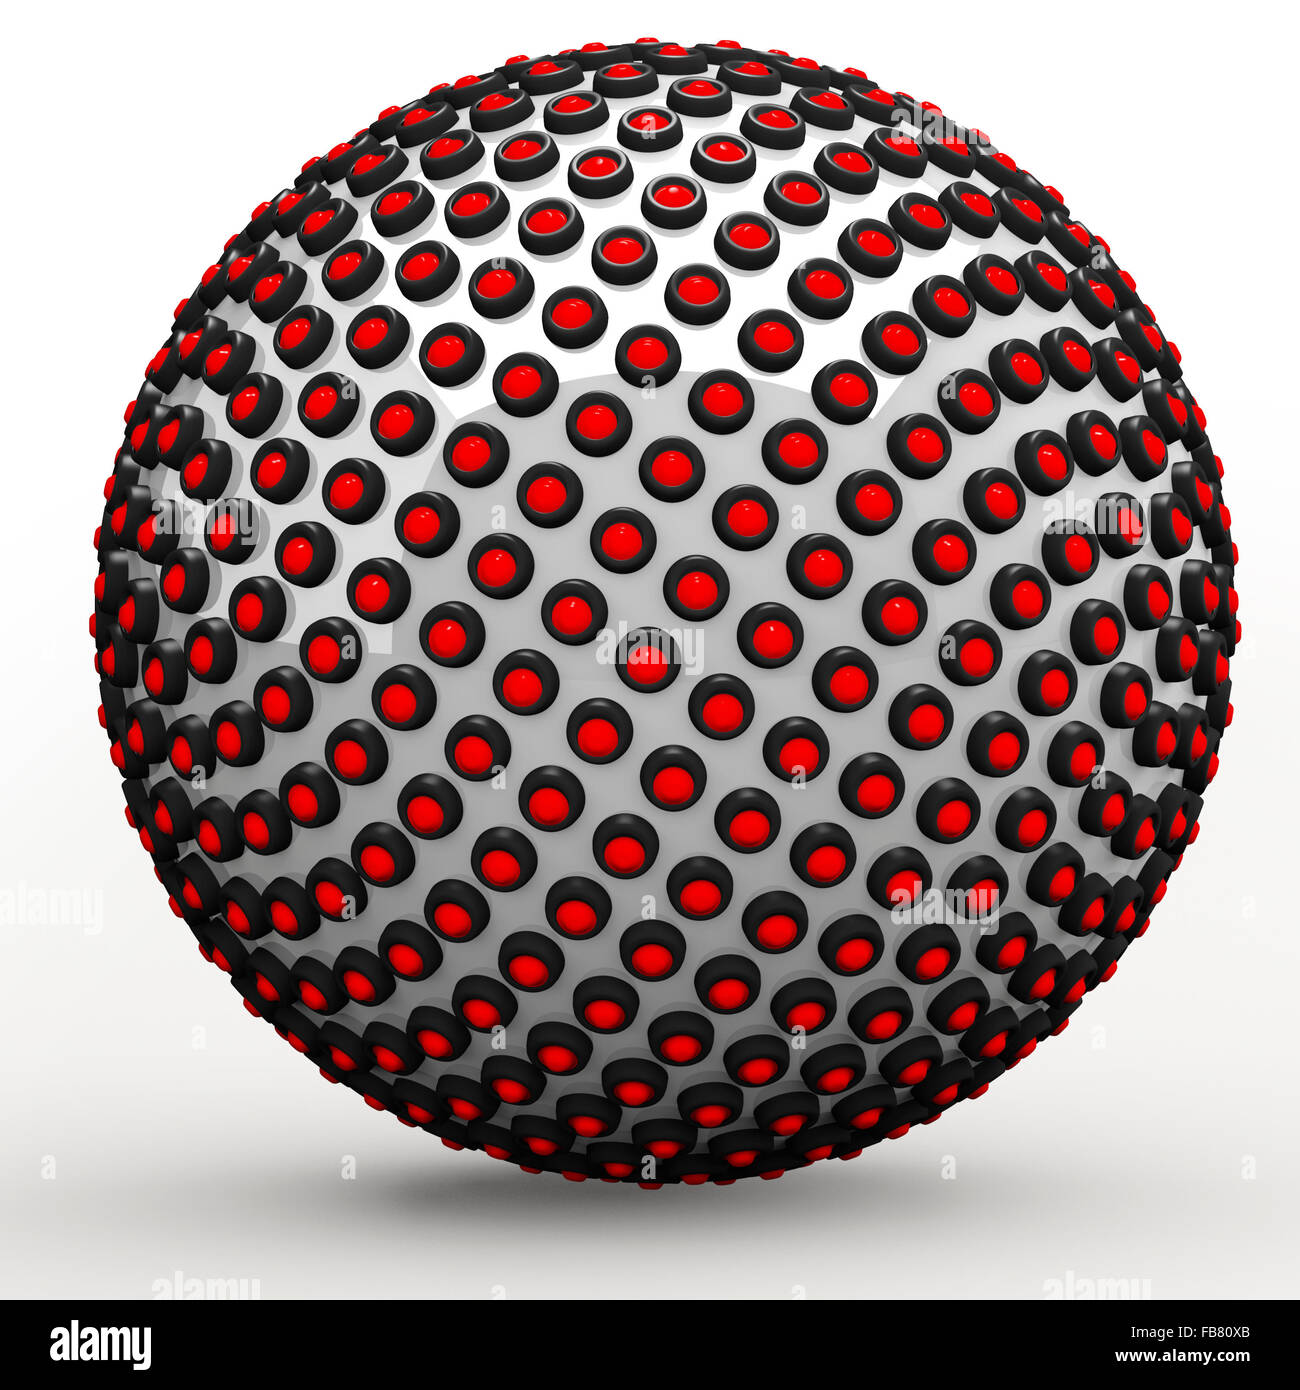 Abstract technol sphere, 3d golden ratio fibonacci sequence concept. Red leds lining a metallic sphere. Stock Photo